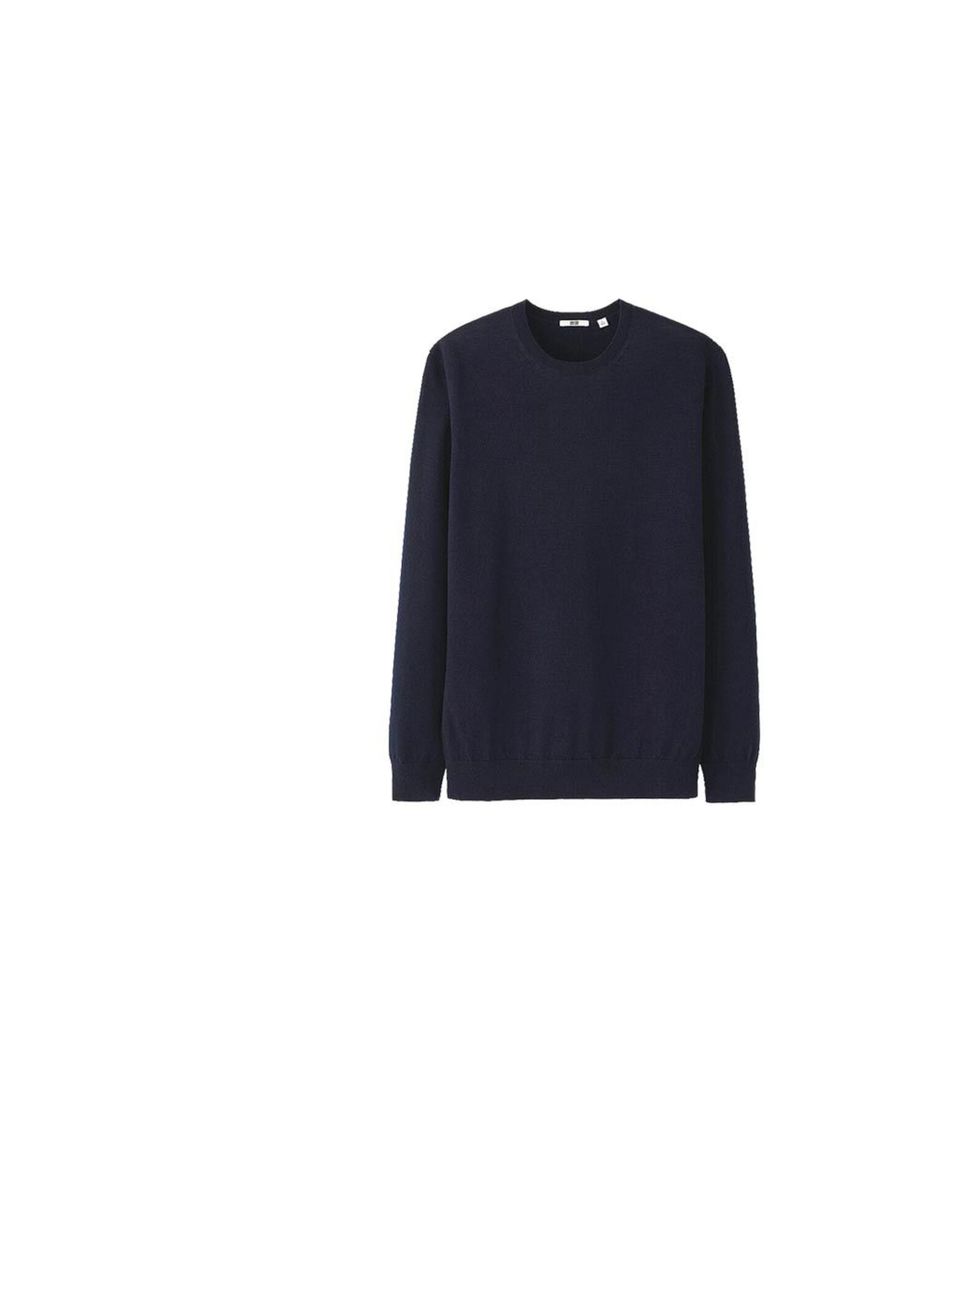 <p>A light knit is the perfect transeasonal buy - wear over tees in the warmer months and under coats when the temperature drops, <a href="http://www.uniqlo.com/uk/store/goods/078686">Uniqlo</a> sweater, £19.90</p>